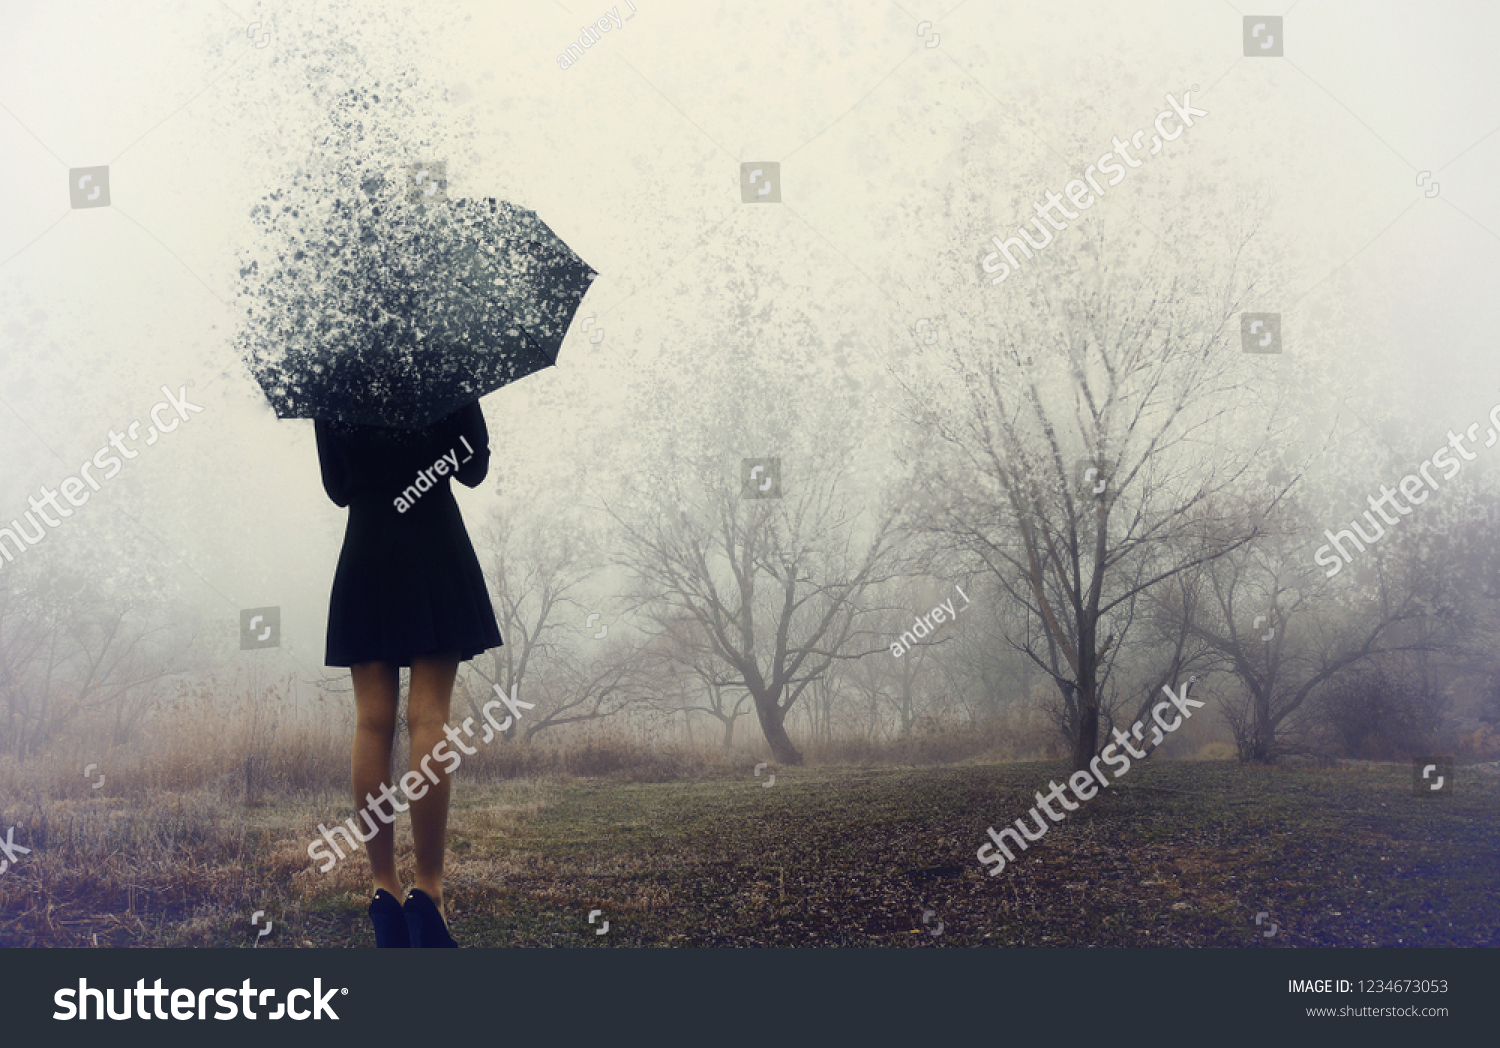 Girl with umbrella standing on the field with trees. #1234673053